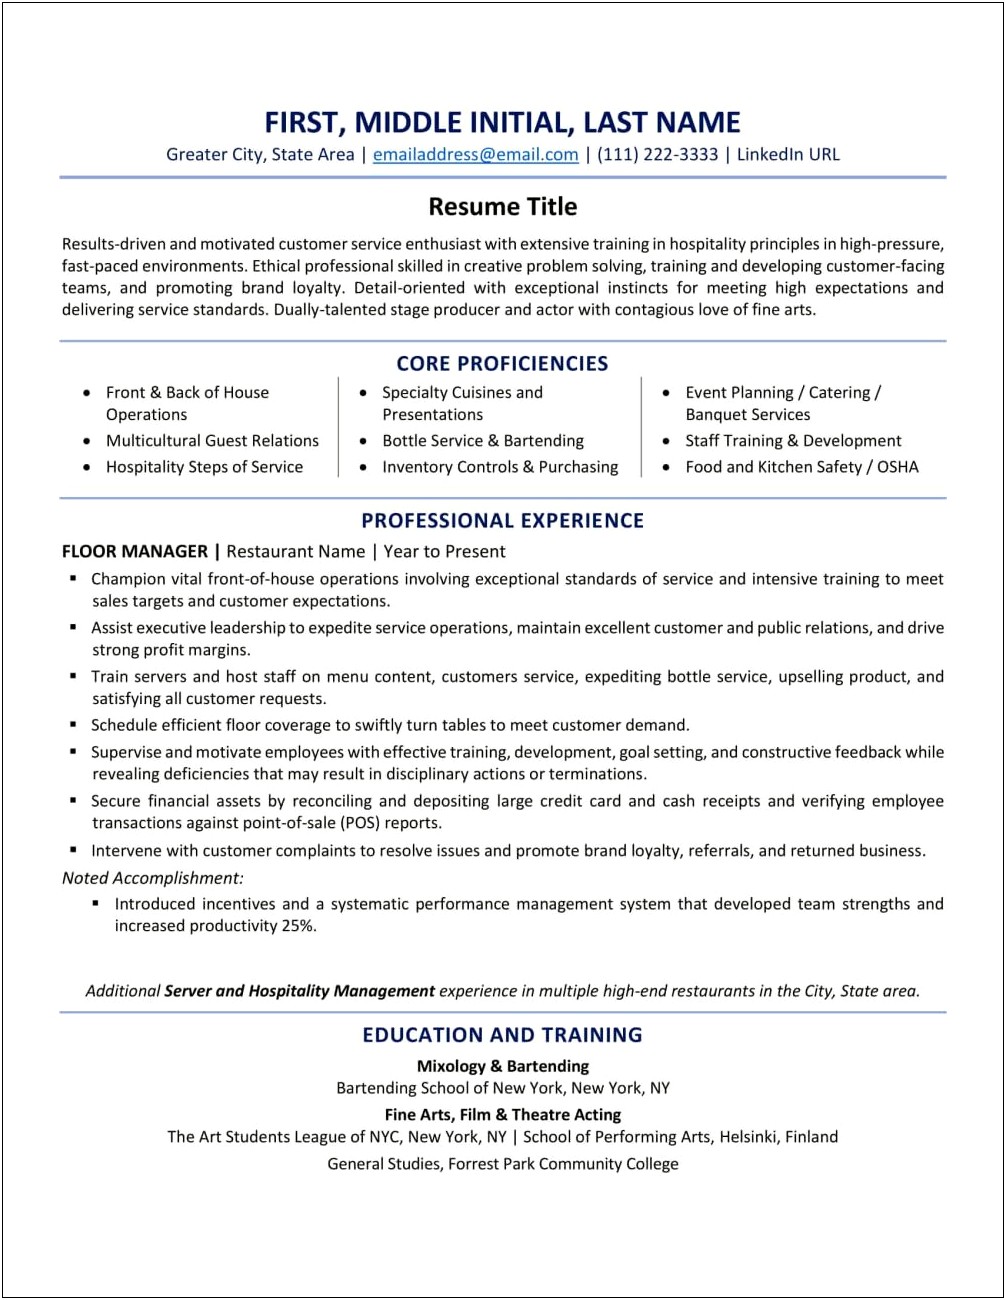 Professional Summary For Resume No Work Experience Sample